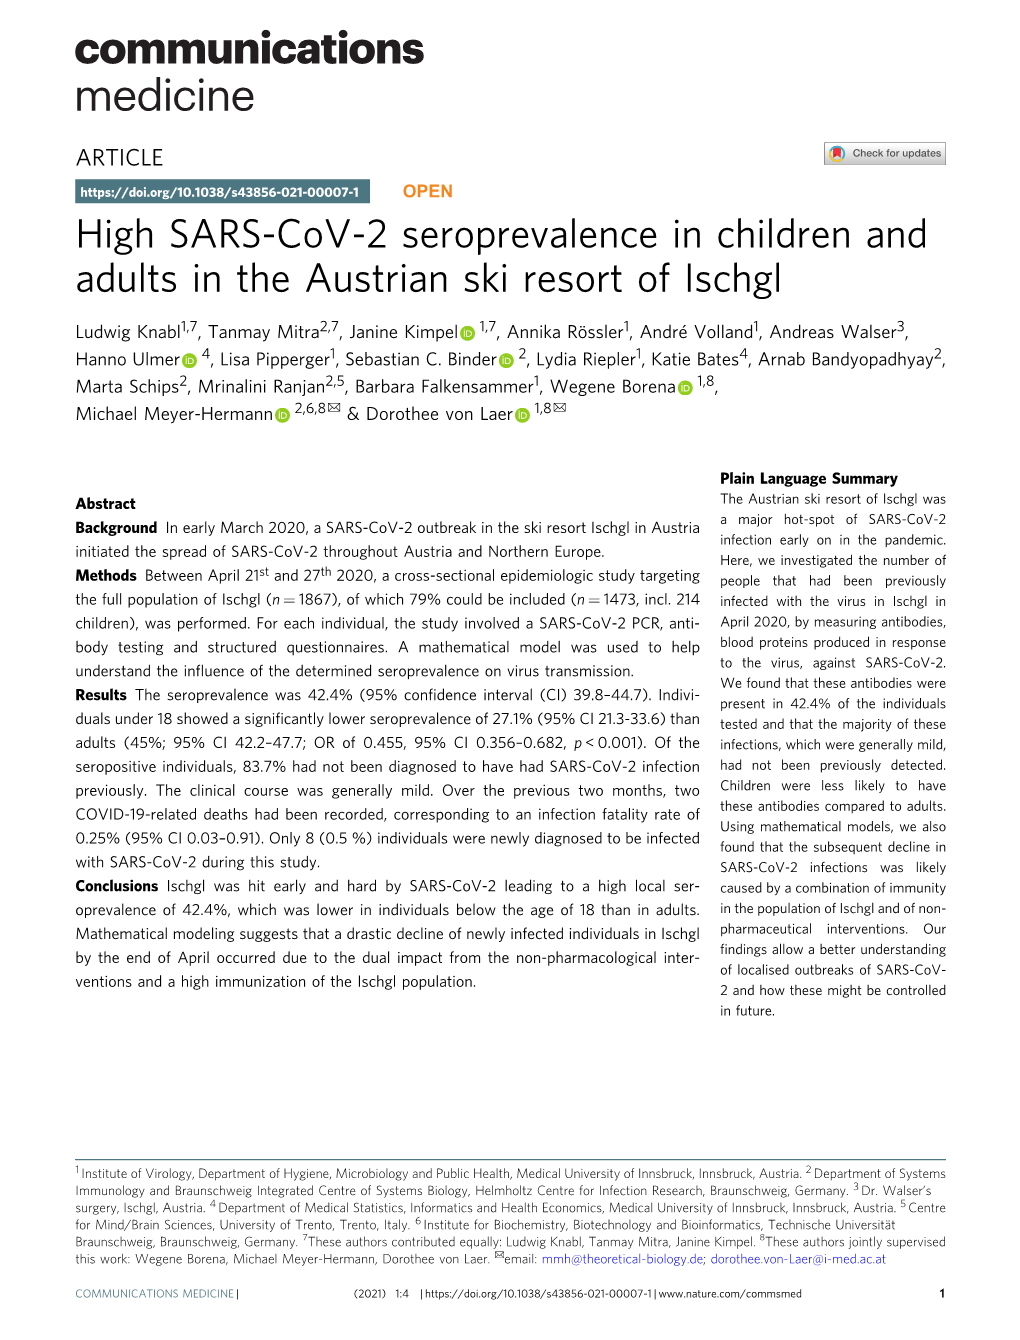 High SARS-Cov-2 Seroprevalence in Children and Adults in the Austrian Ski Resort of Ischgl